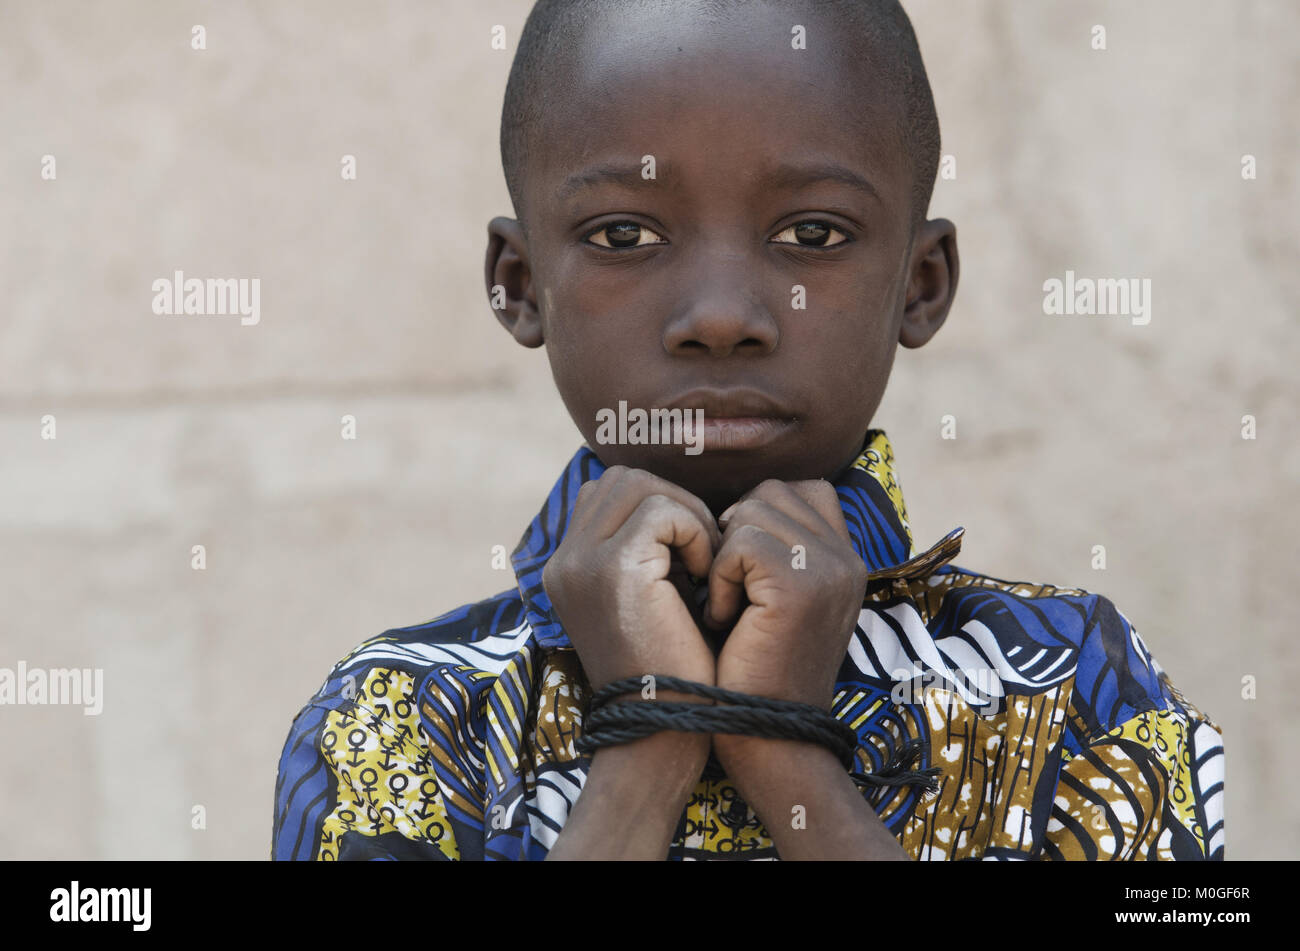 Human Rights - African Child Labour Refugee Slavery Symbol Stock Photo